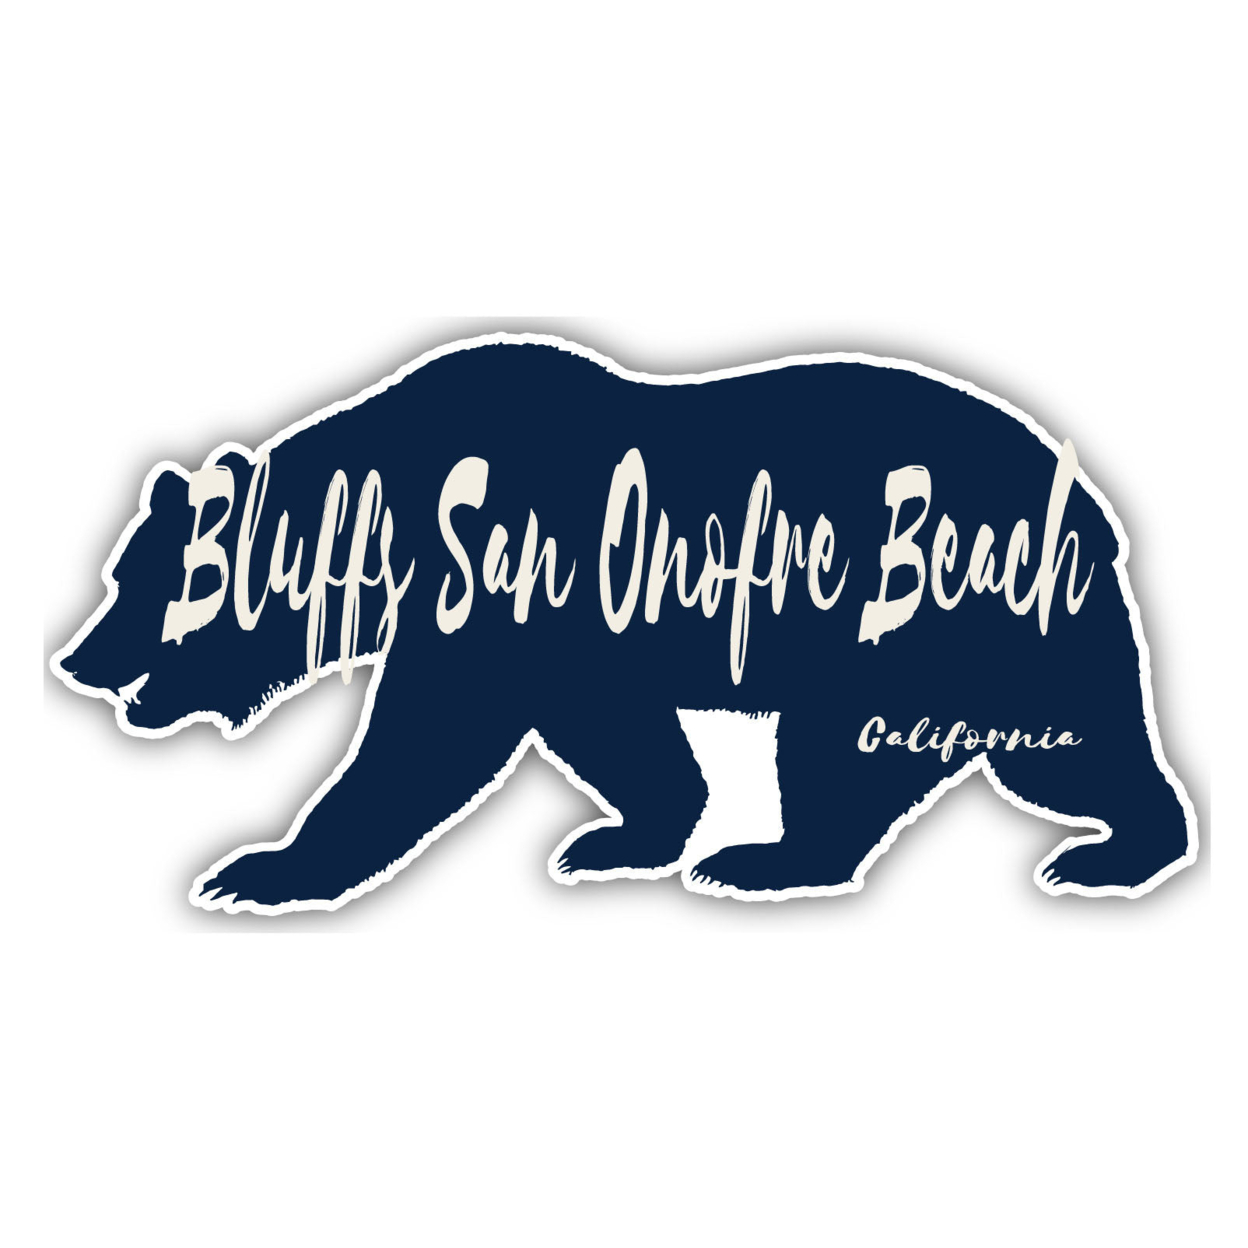 Bluffs San Onofre Beach California Souvenir Decorative Stickers (Choose Theme And Size) - 4-Pack, 12-Inch, Bear